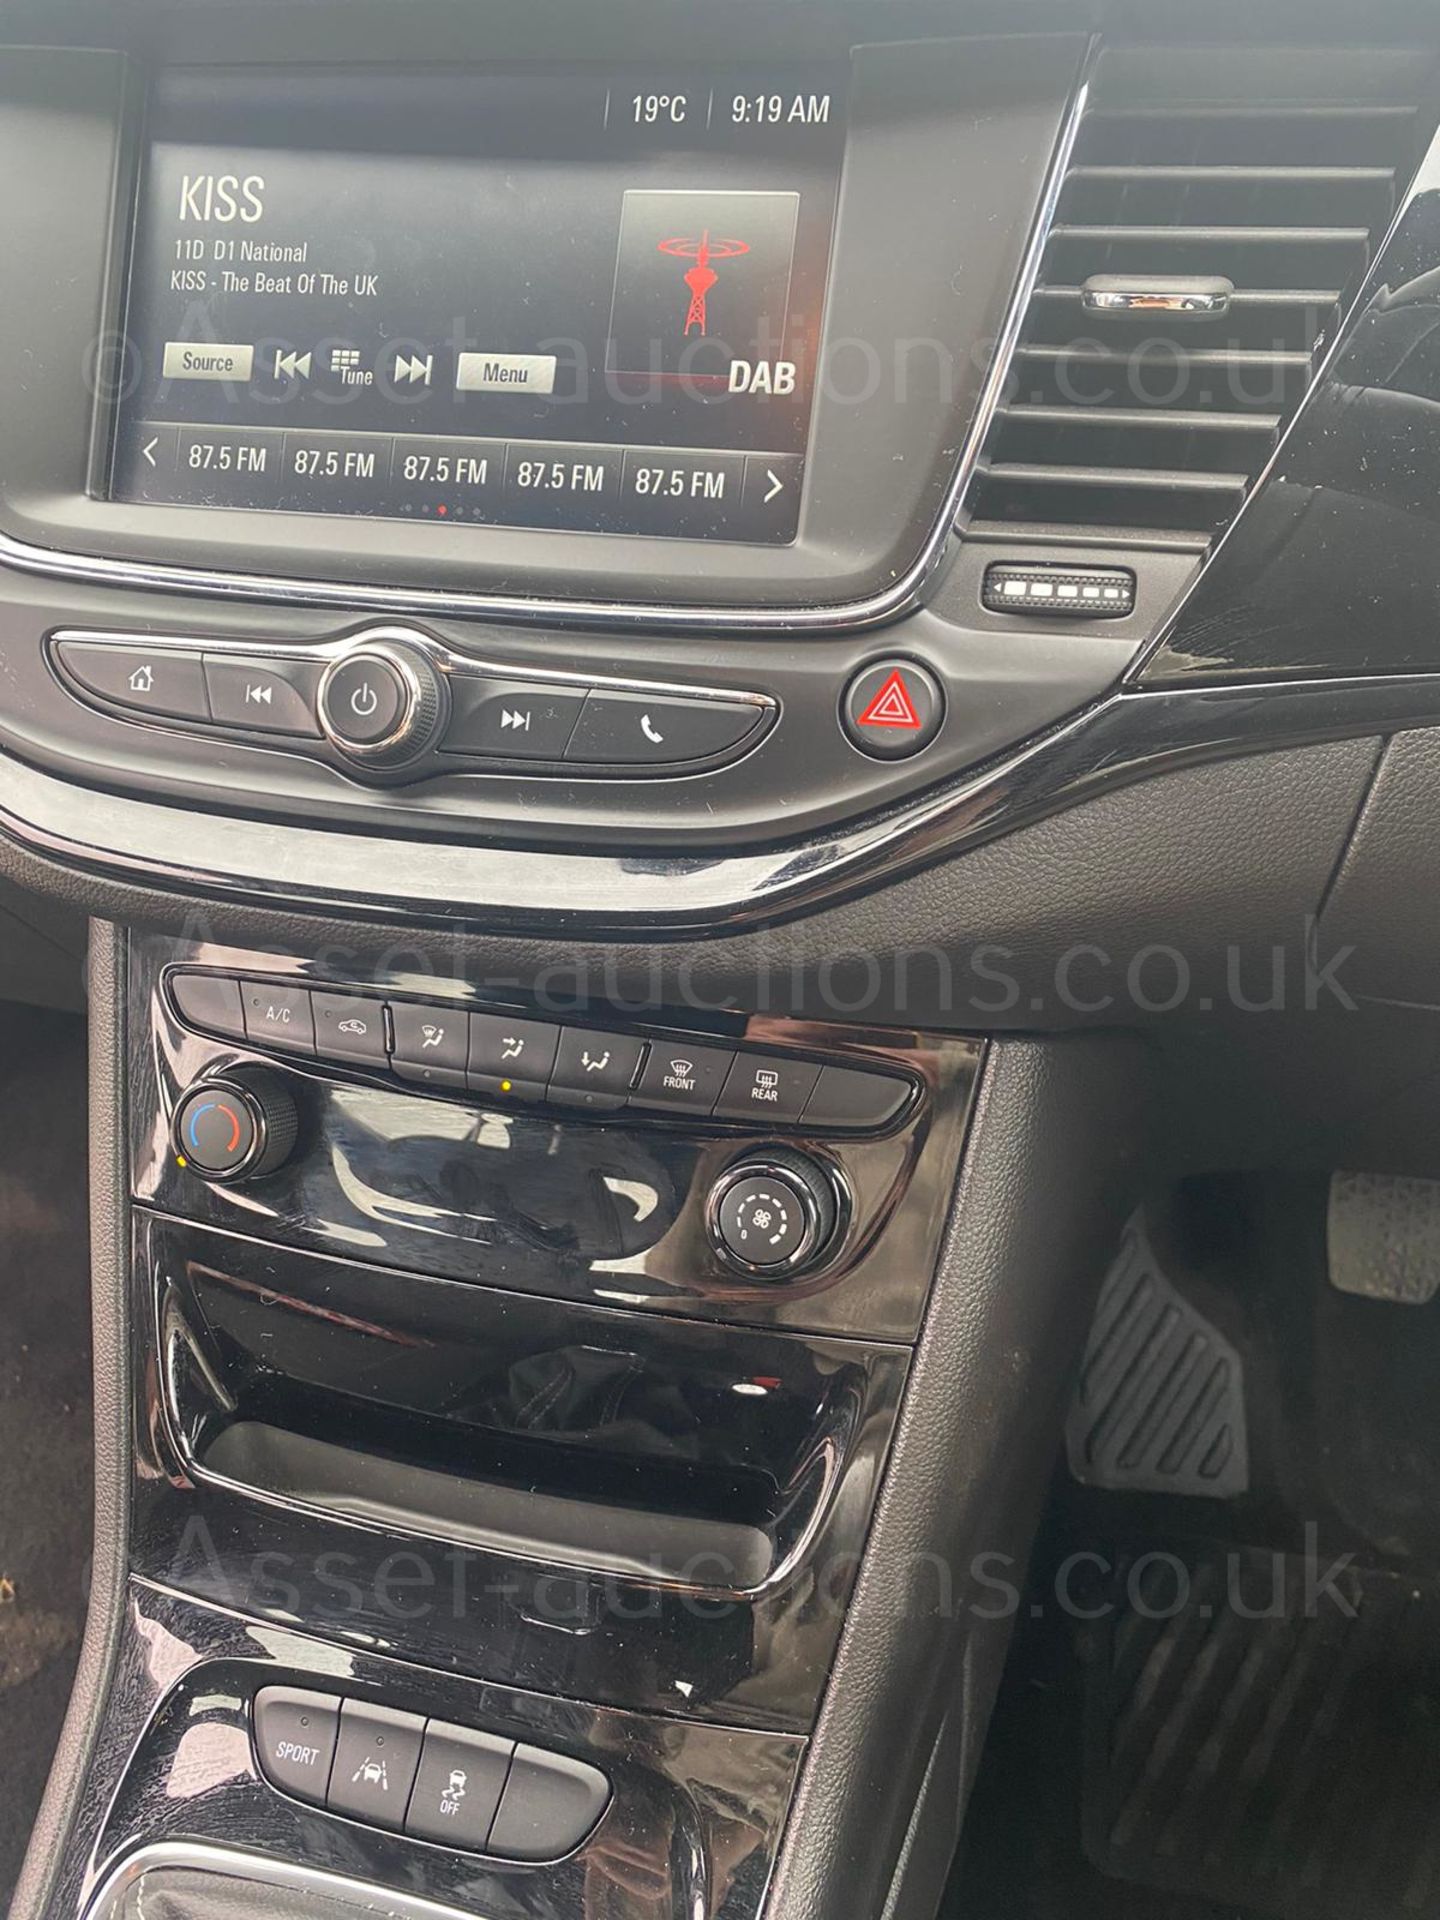 2018/18 REG VAUXHALL ASTRA SRI TURBO 1.4 PETROL SILVER 5 DOOR HATCHBACK, SHOWING 2 FORMER KEEPERS - Image 11 of 12